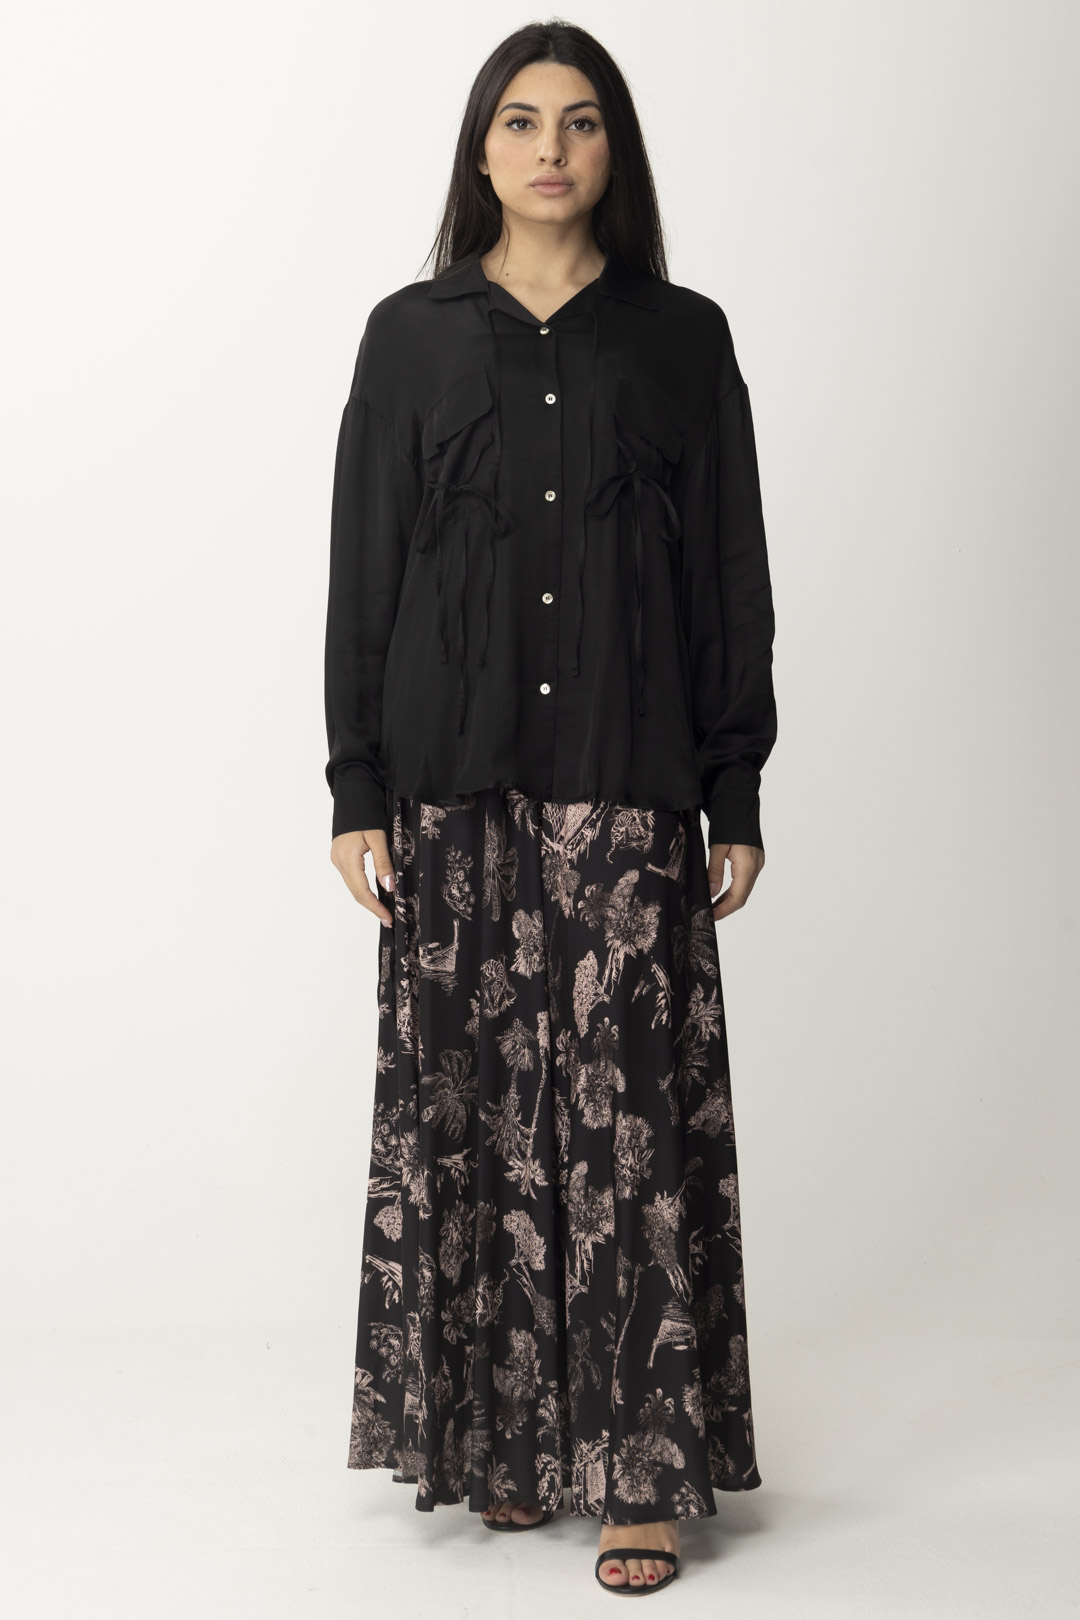 Preview: Aniye By Long Printed Skirt with Maddy Belt BLACK HAWAII